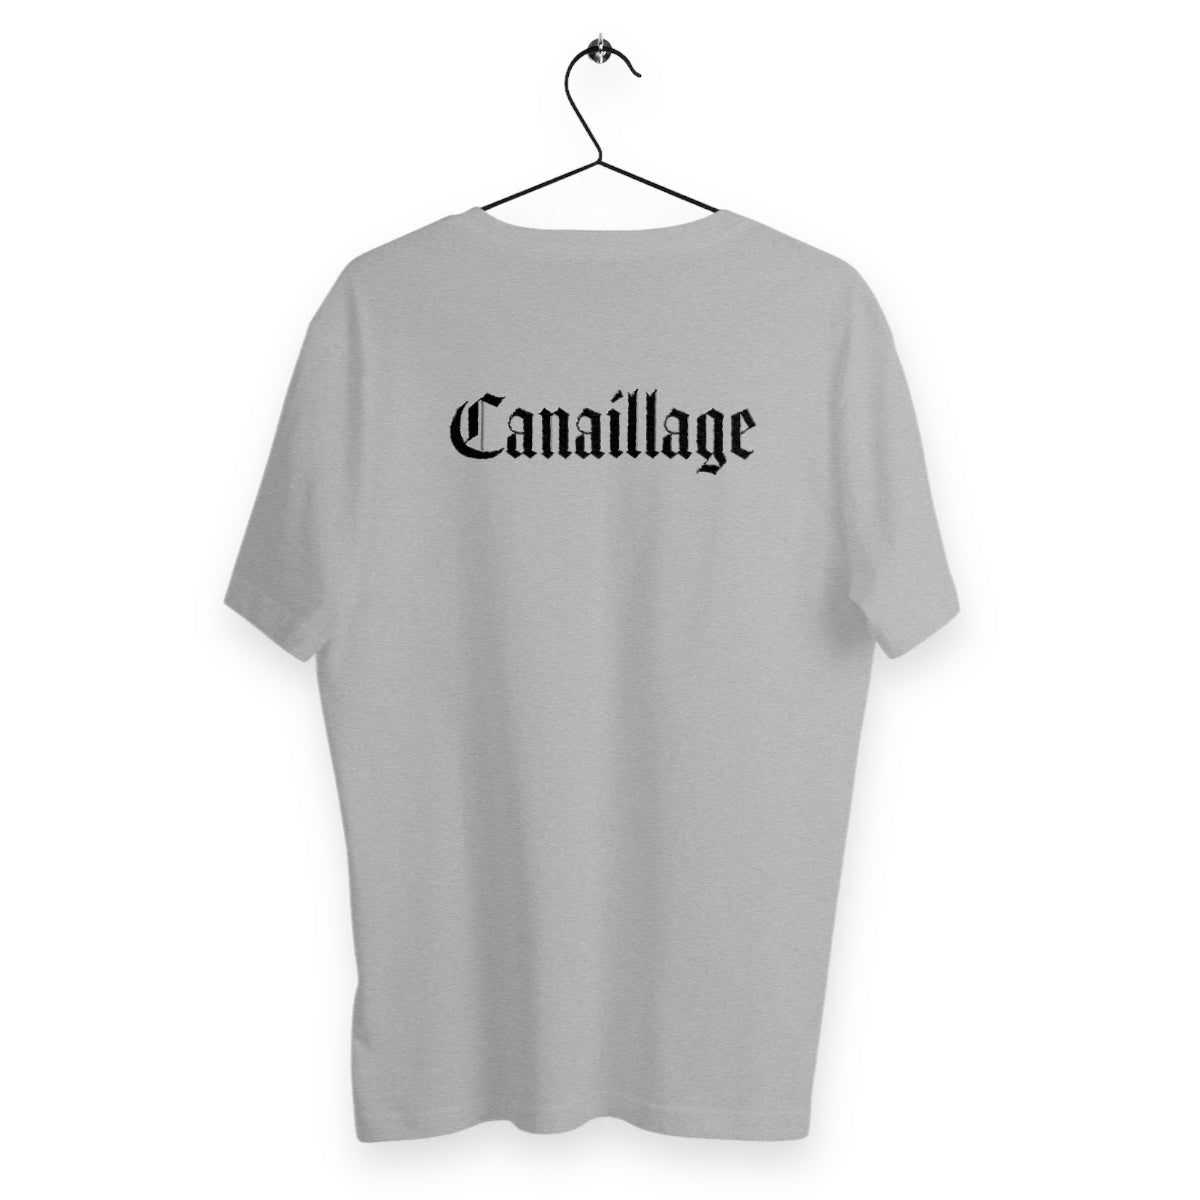 T-shirt homme canaillage goth